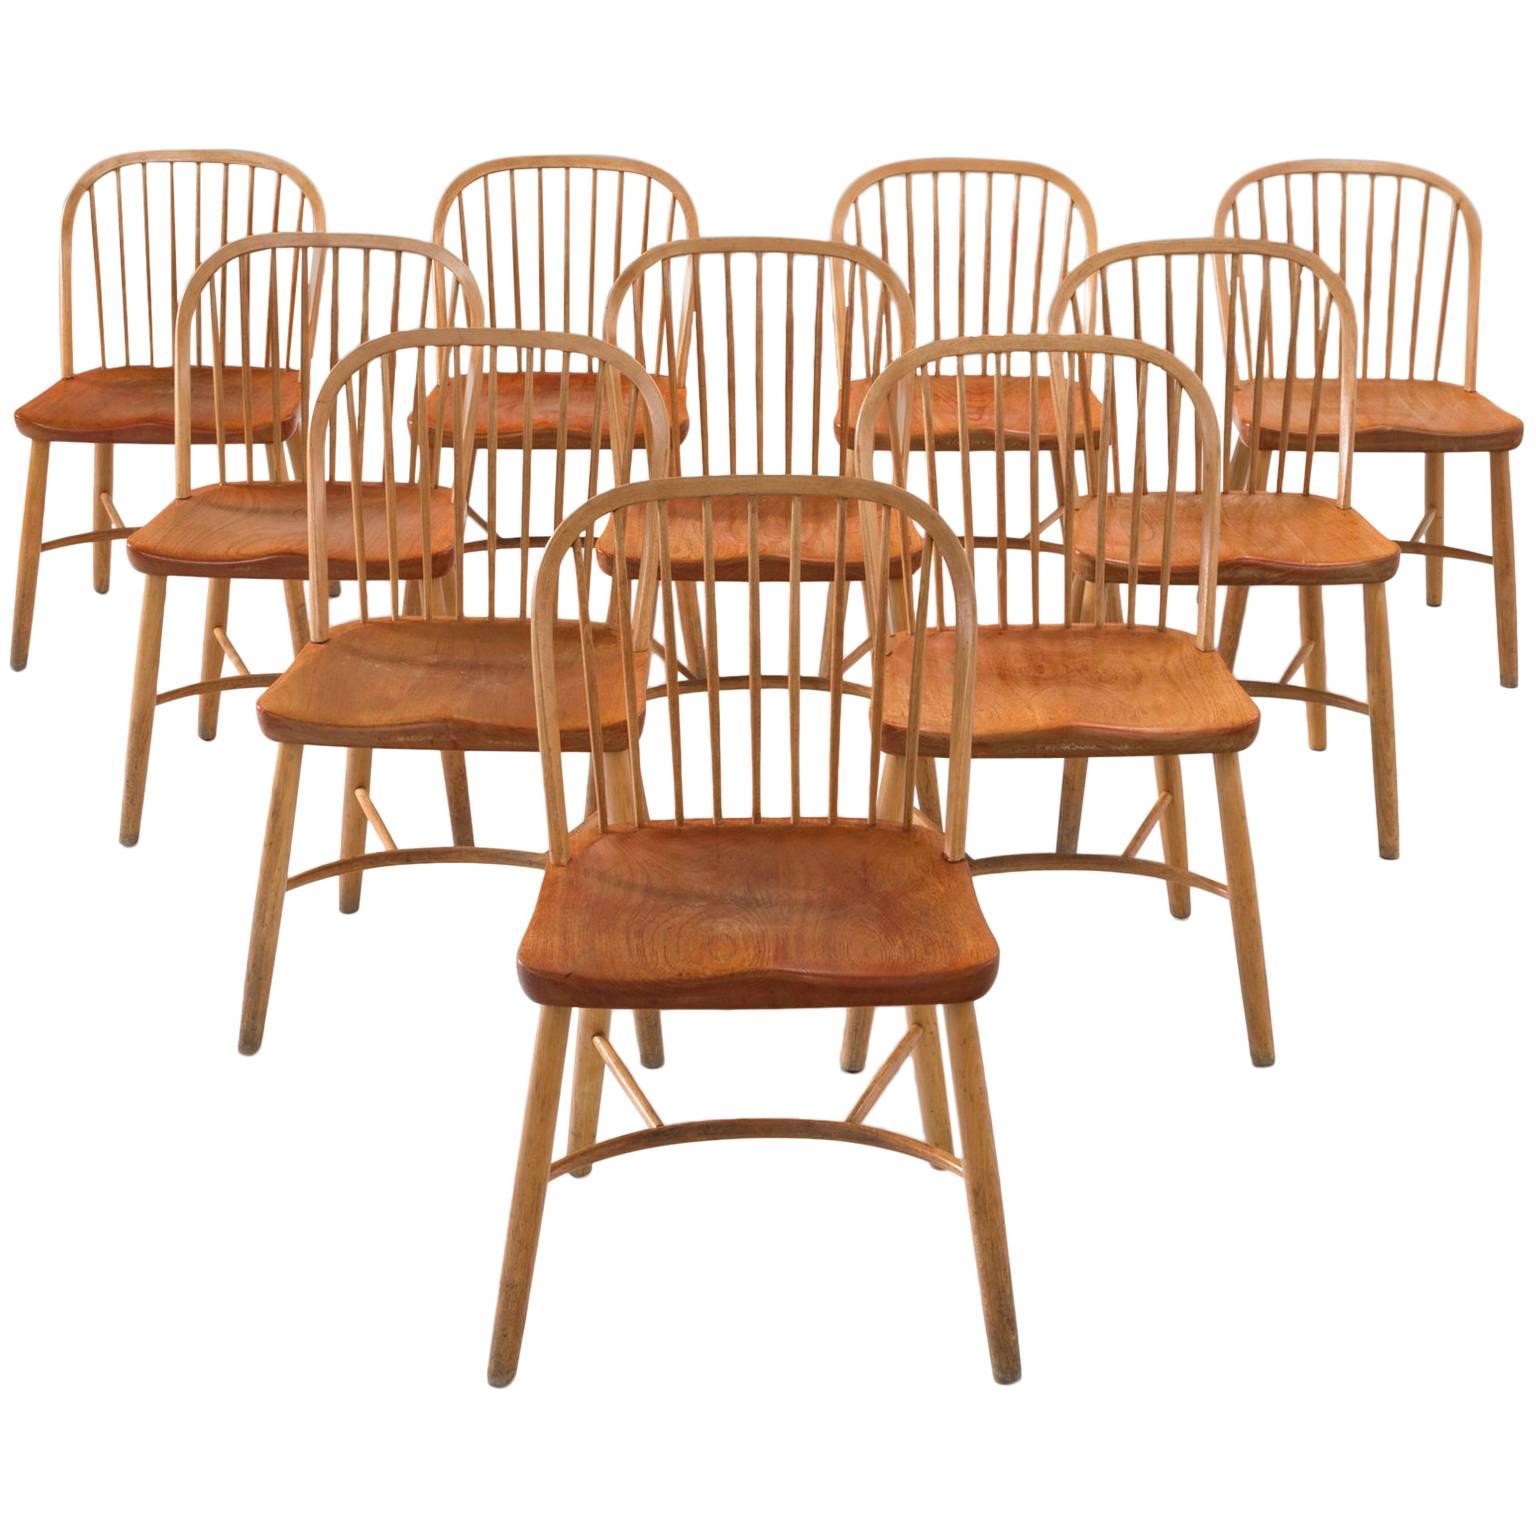 Palle Suenson Dining Chairs in Teak and Beech